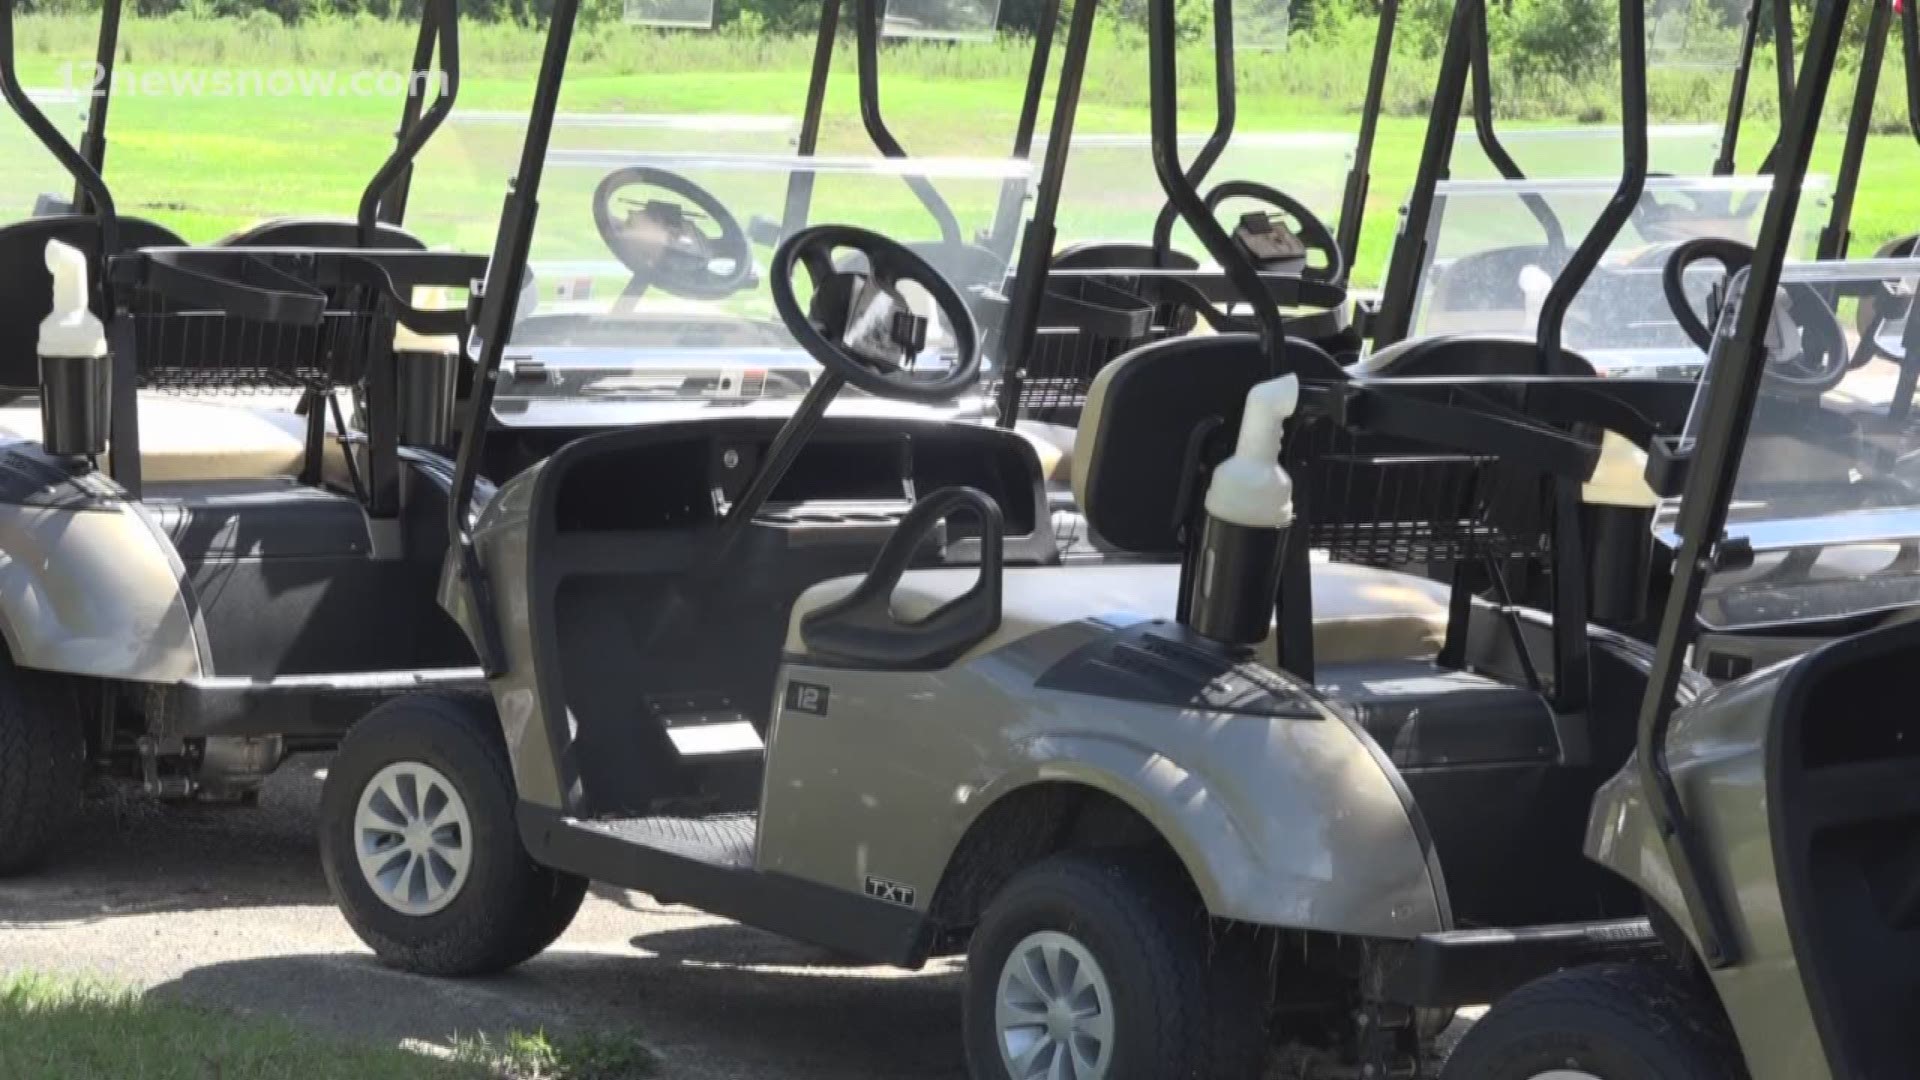 New golf course opens up in Beaumont